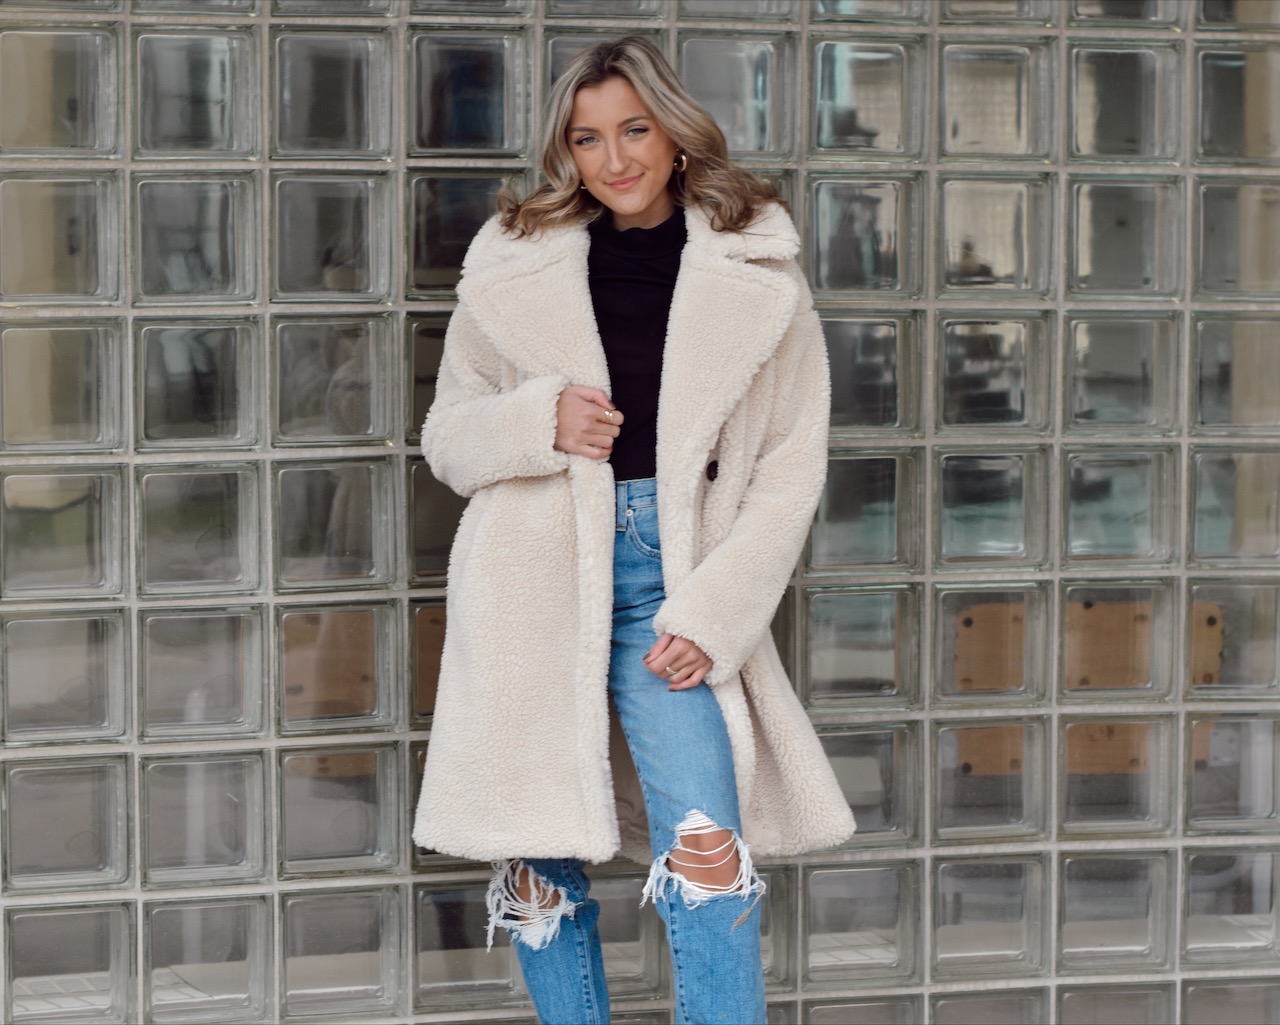 Outerwear Trends You Need To Follow This Winter